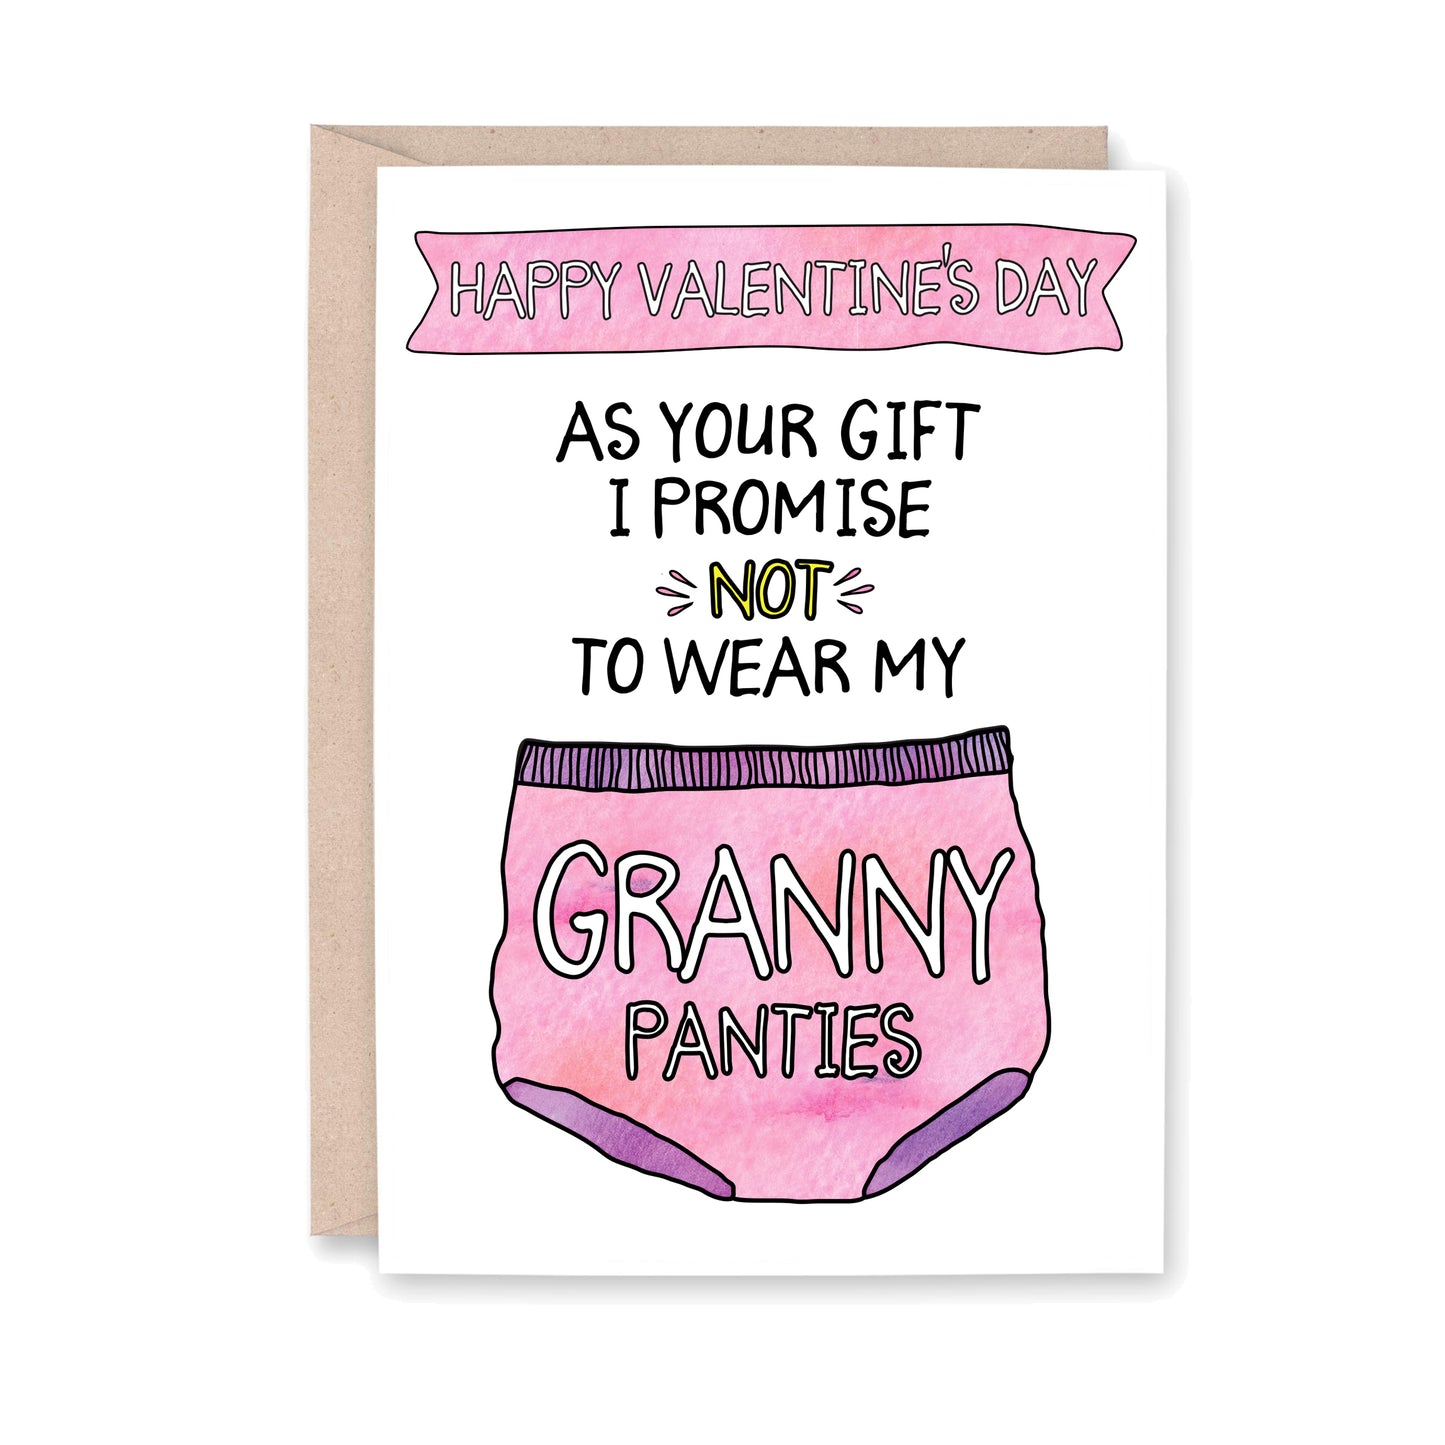 Happy Valentine's Day Greeting Card. Card reads, Happy Valentine's Day. As your gift I promise not to wear my granny panties